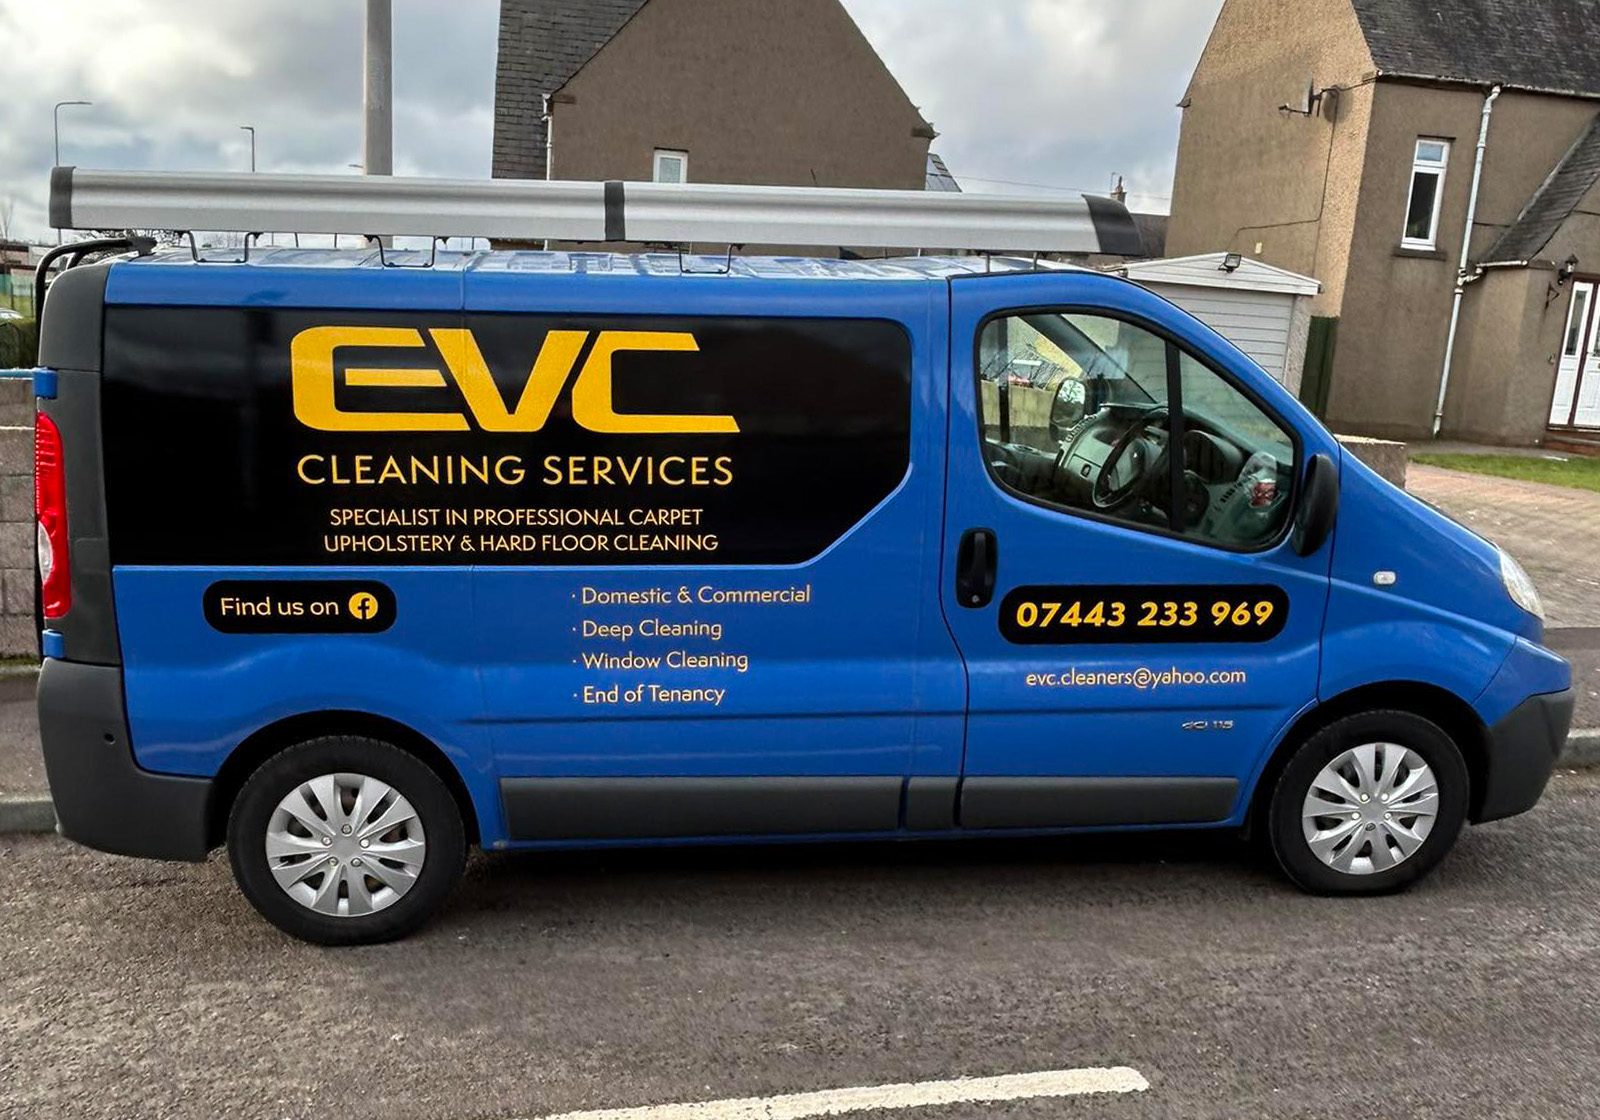 evc cleaning services van